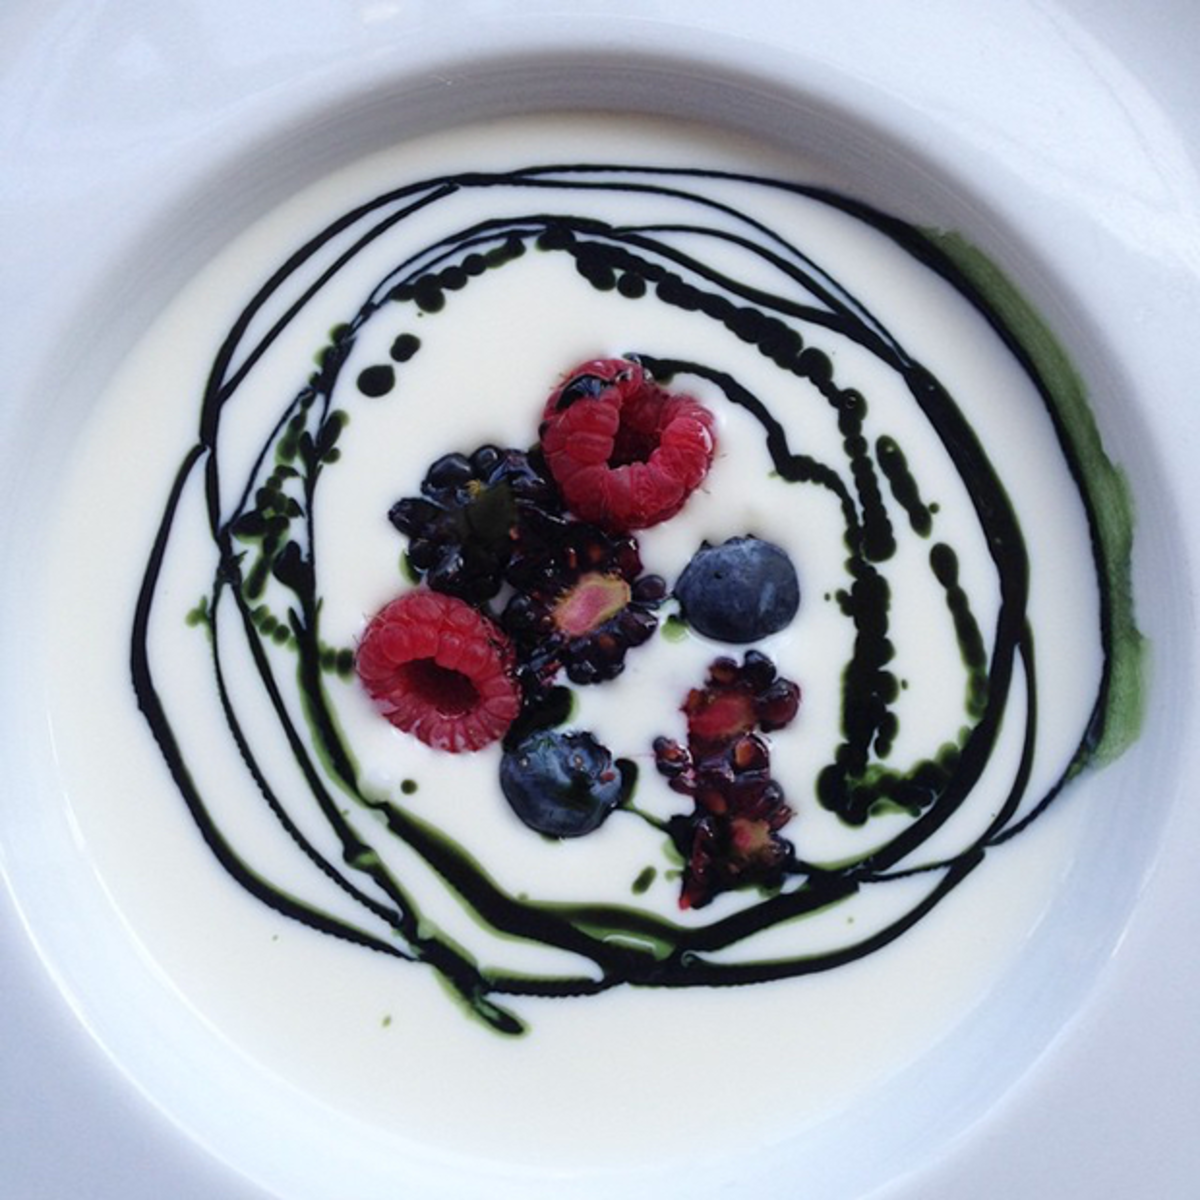 The Instagram-famous chlorophyll yogurt from Croft Alley on Melrose Place 